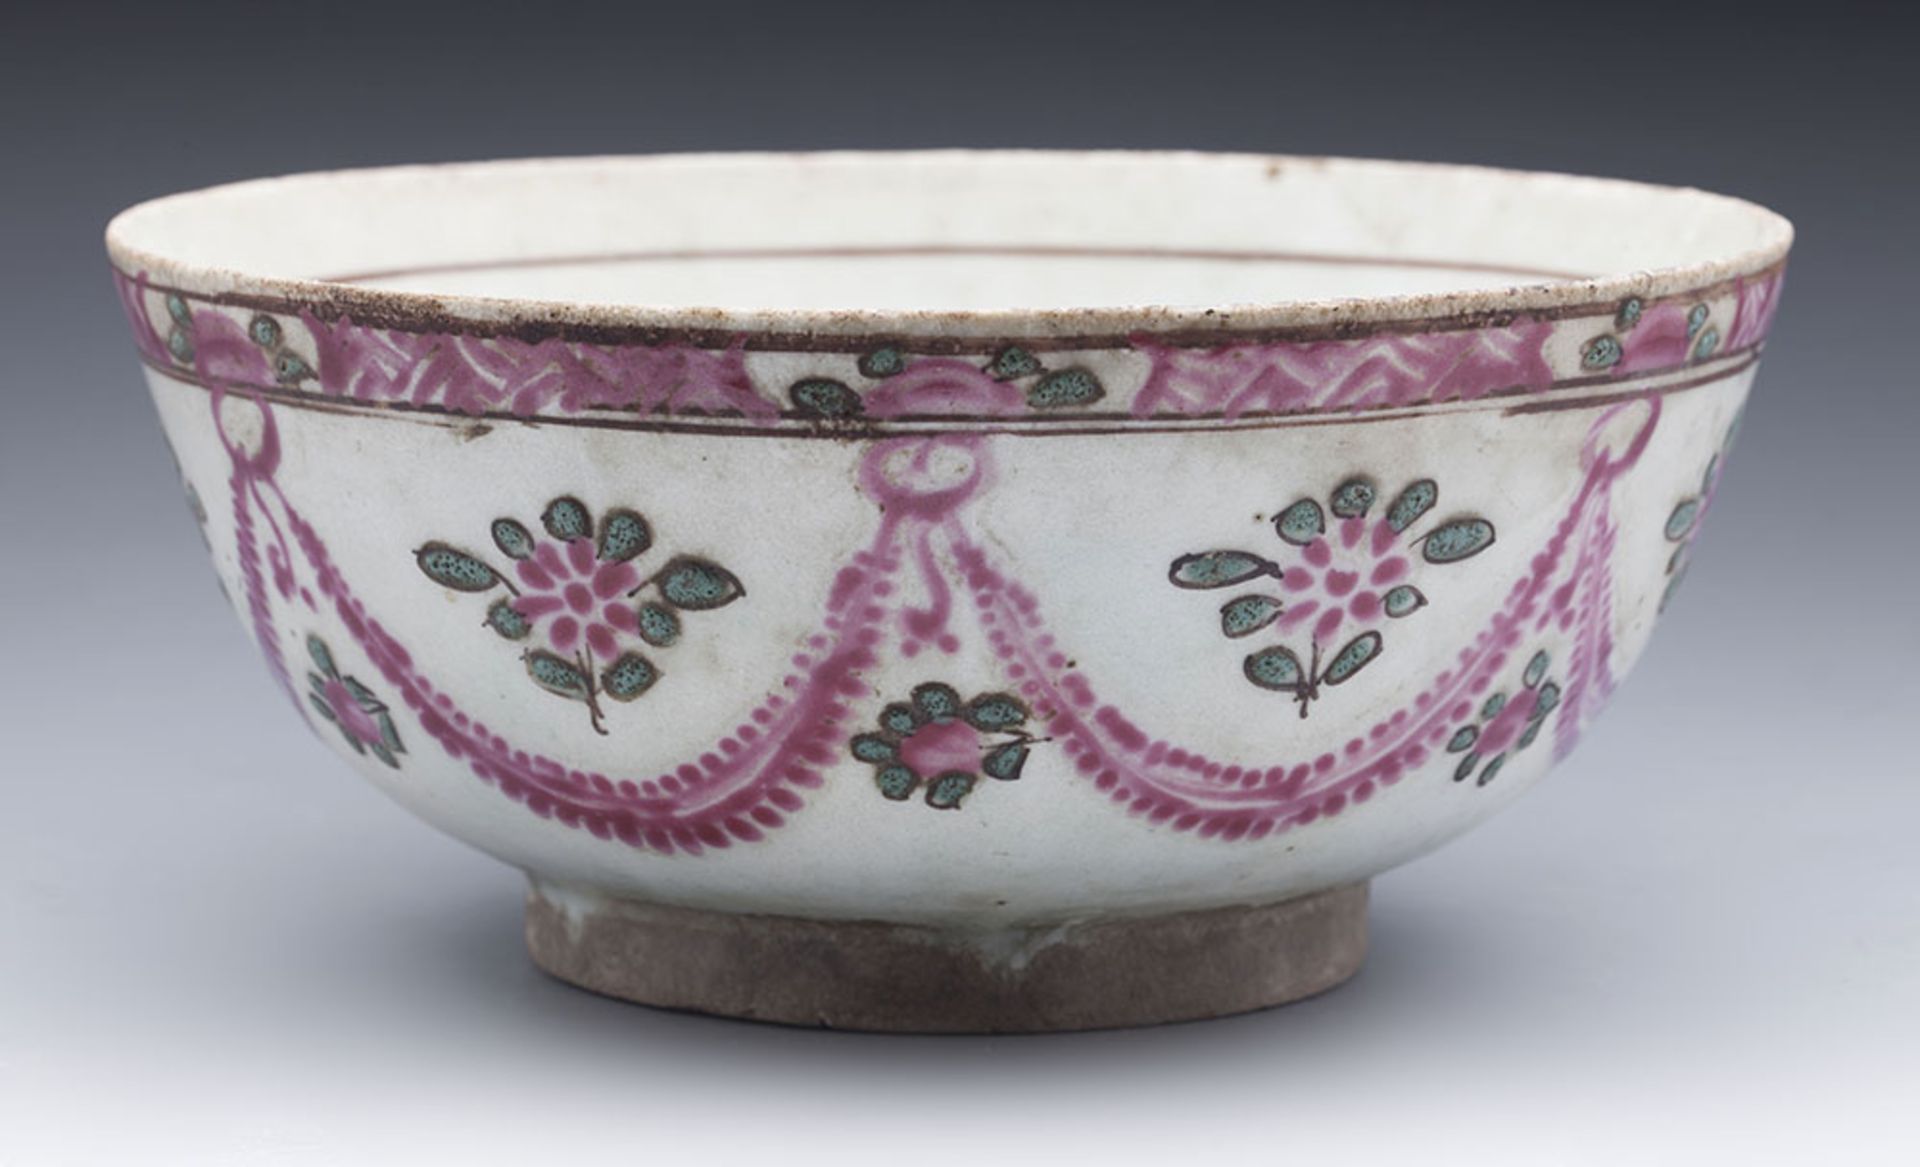 MIDDLE EASTERN BOWL 17/18TH C. - Image 4 of 9